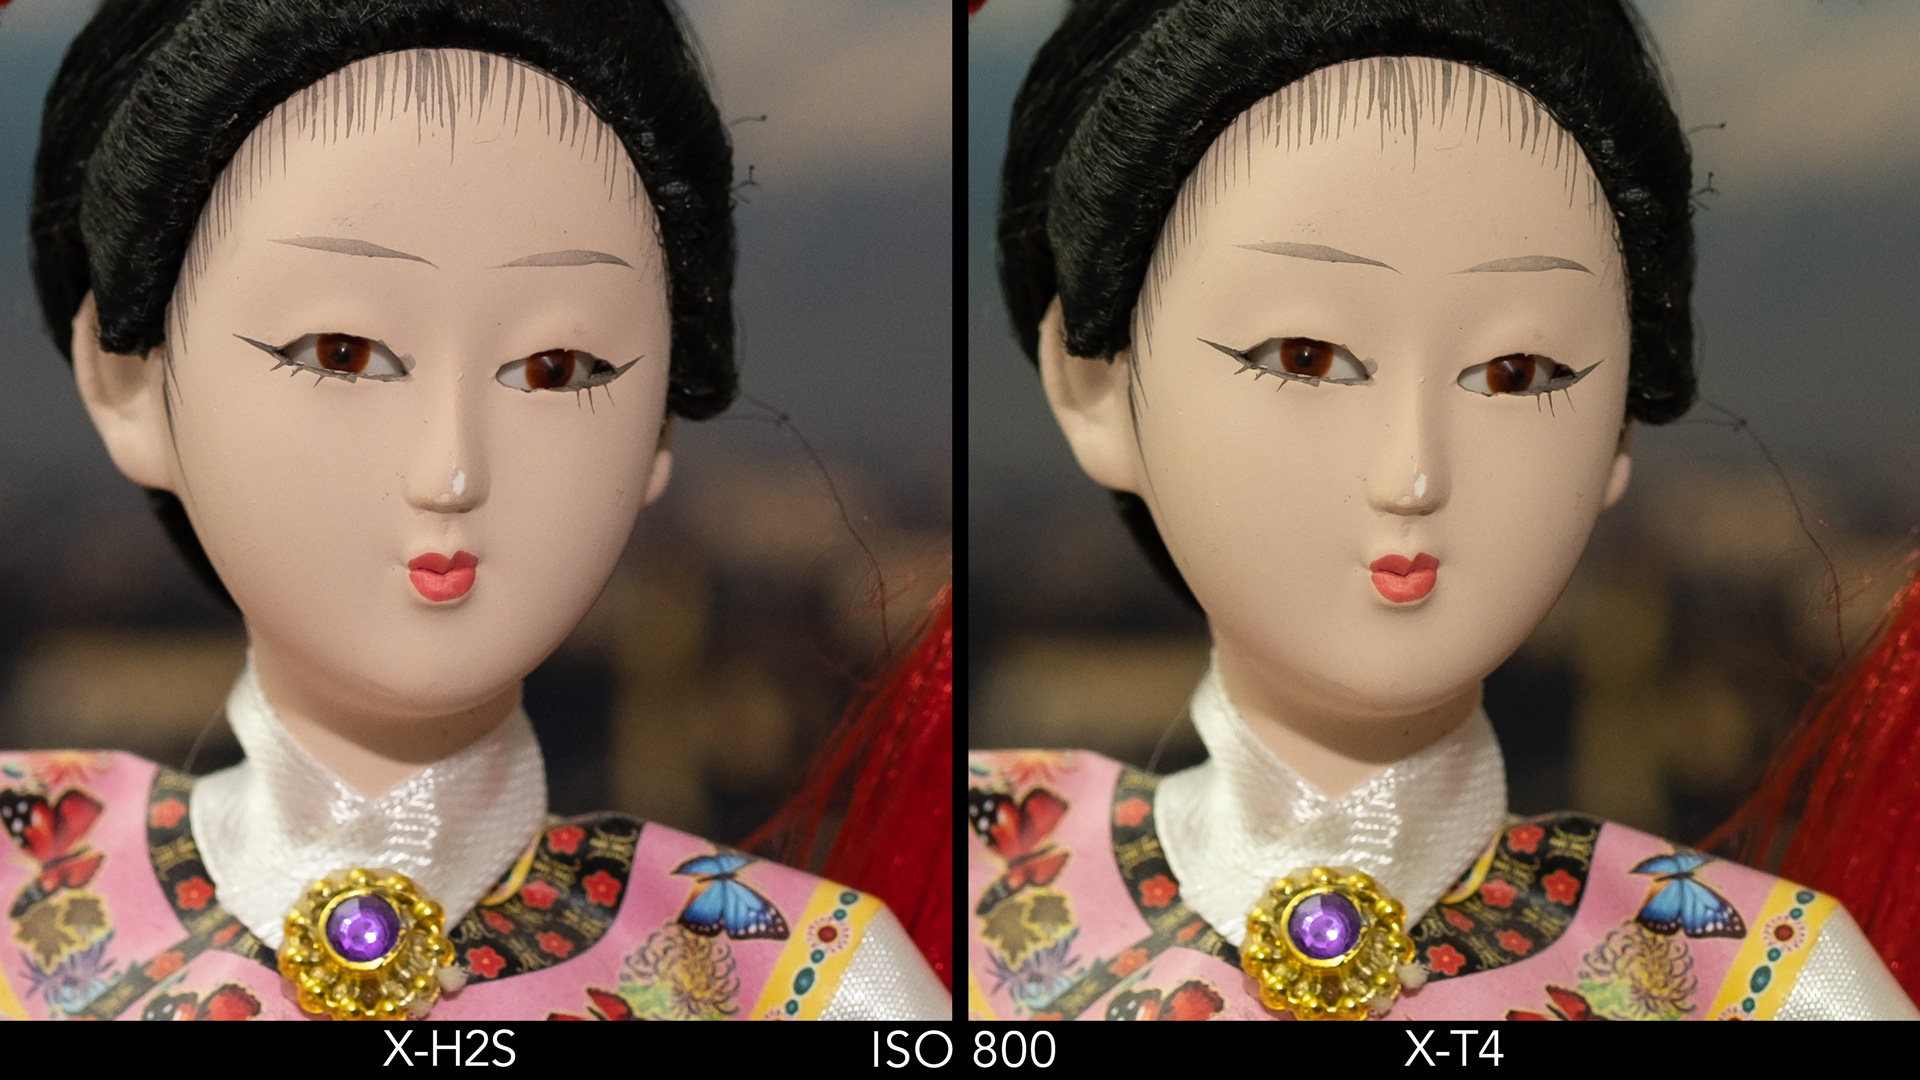 Side by side crop of the Japanese doll, showing the quality at ISO 800 for the X-H2S and X-T4